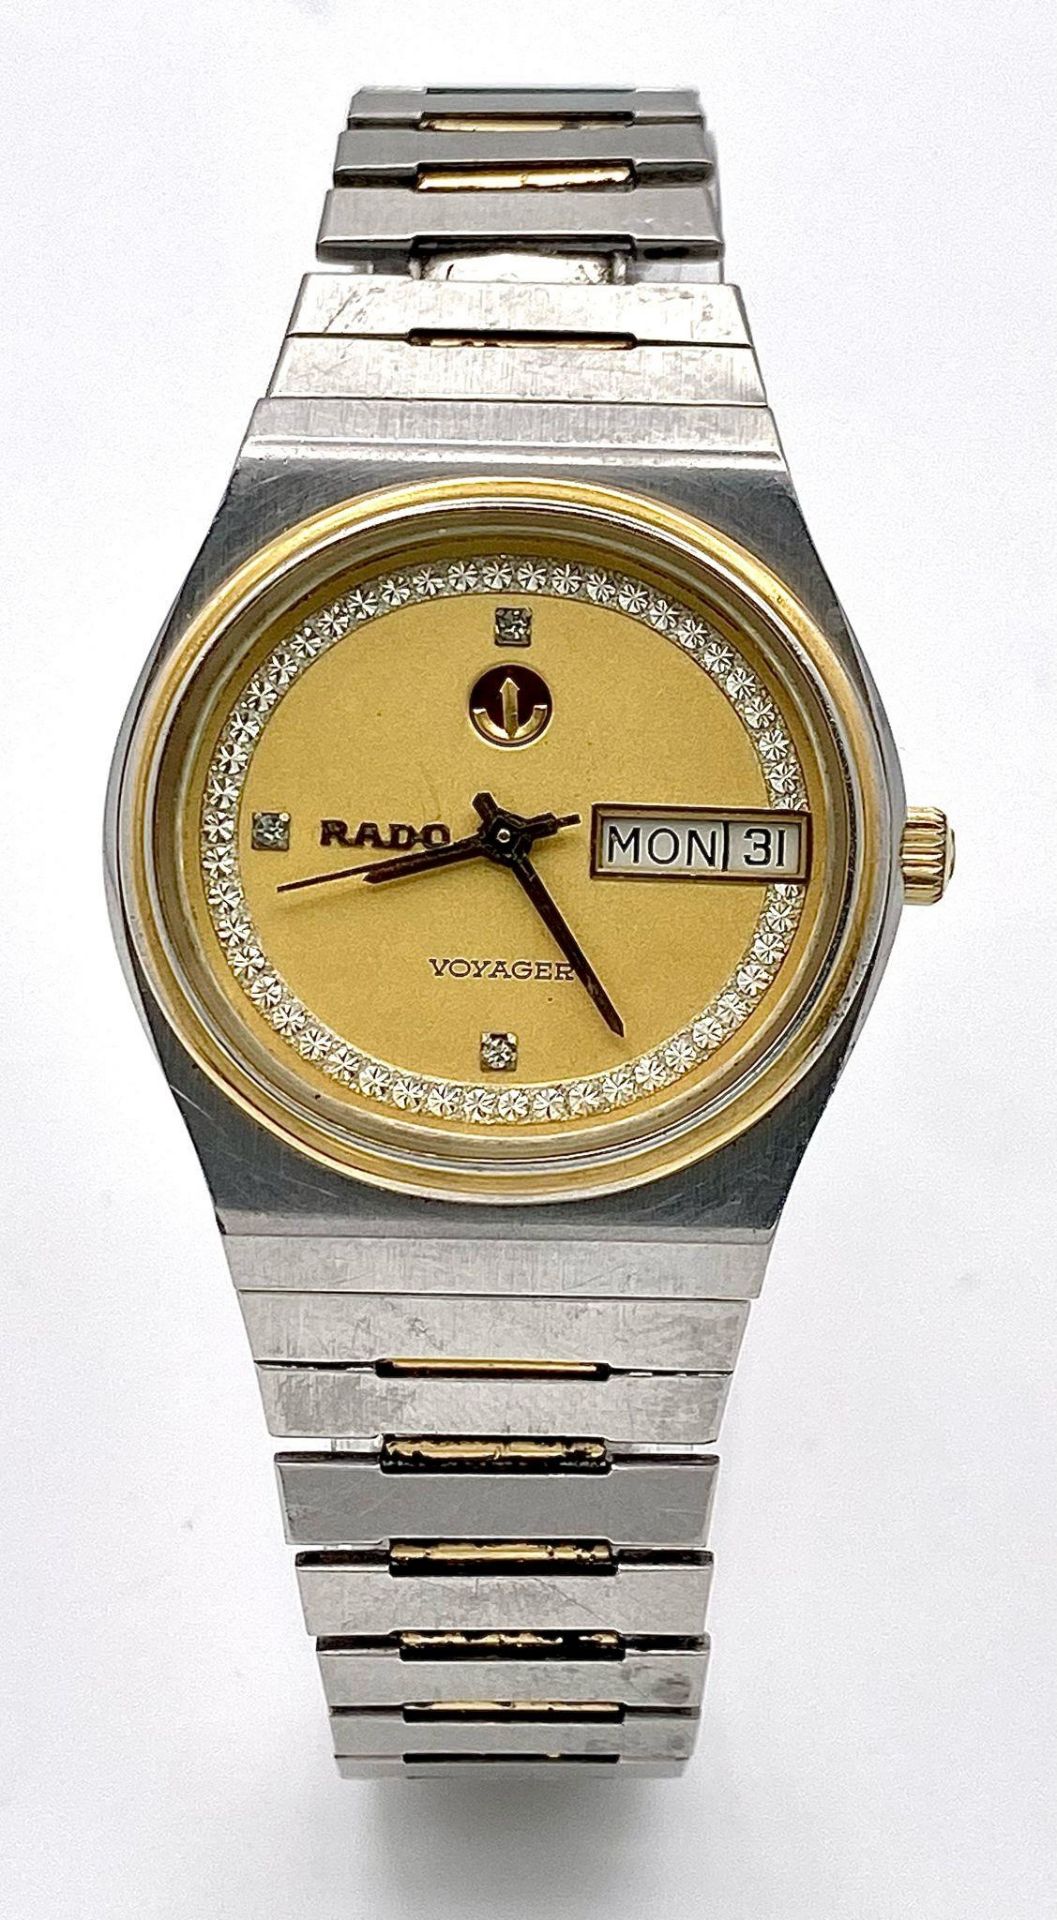 A Vintage Rado Voyager Automatic Unisex Watch. Stainless steel bracelet and case - 33mm. Gilded dial - Bild 3 aus 7